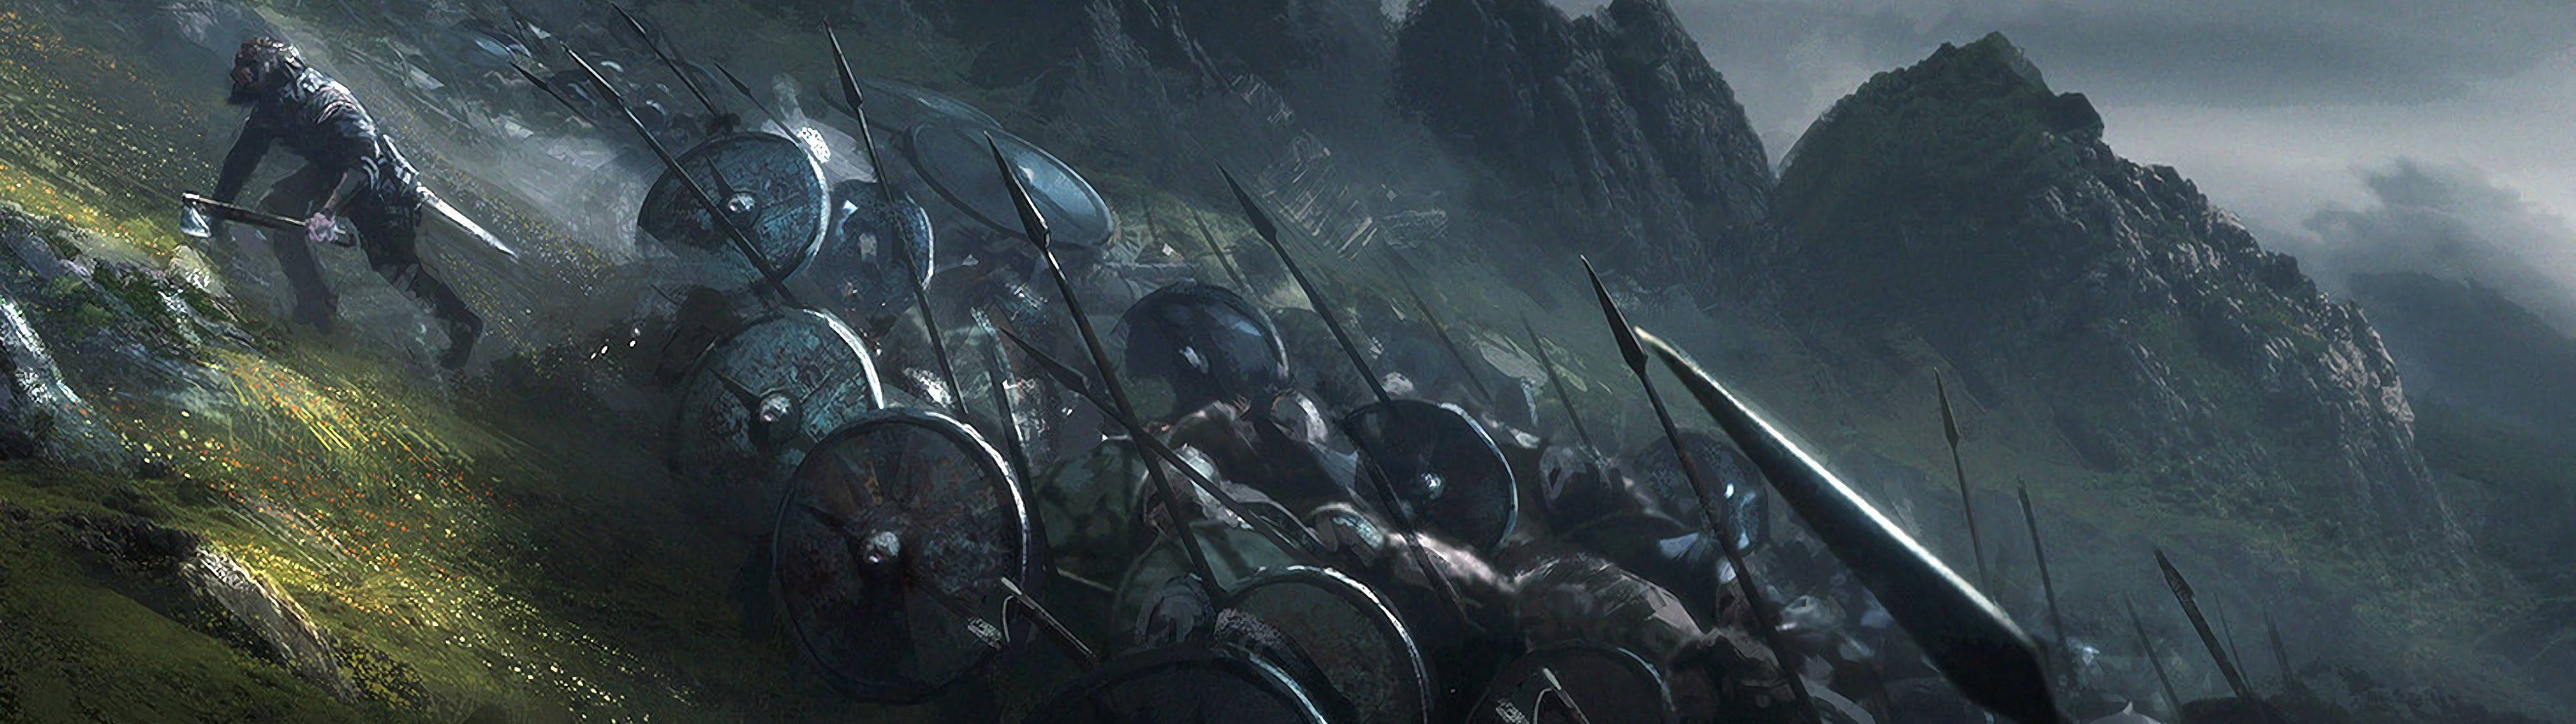 3840X1080 Viking Wallpaper and Background